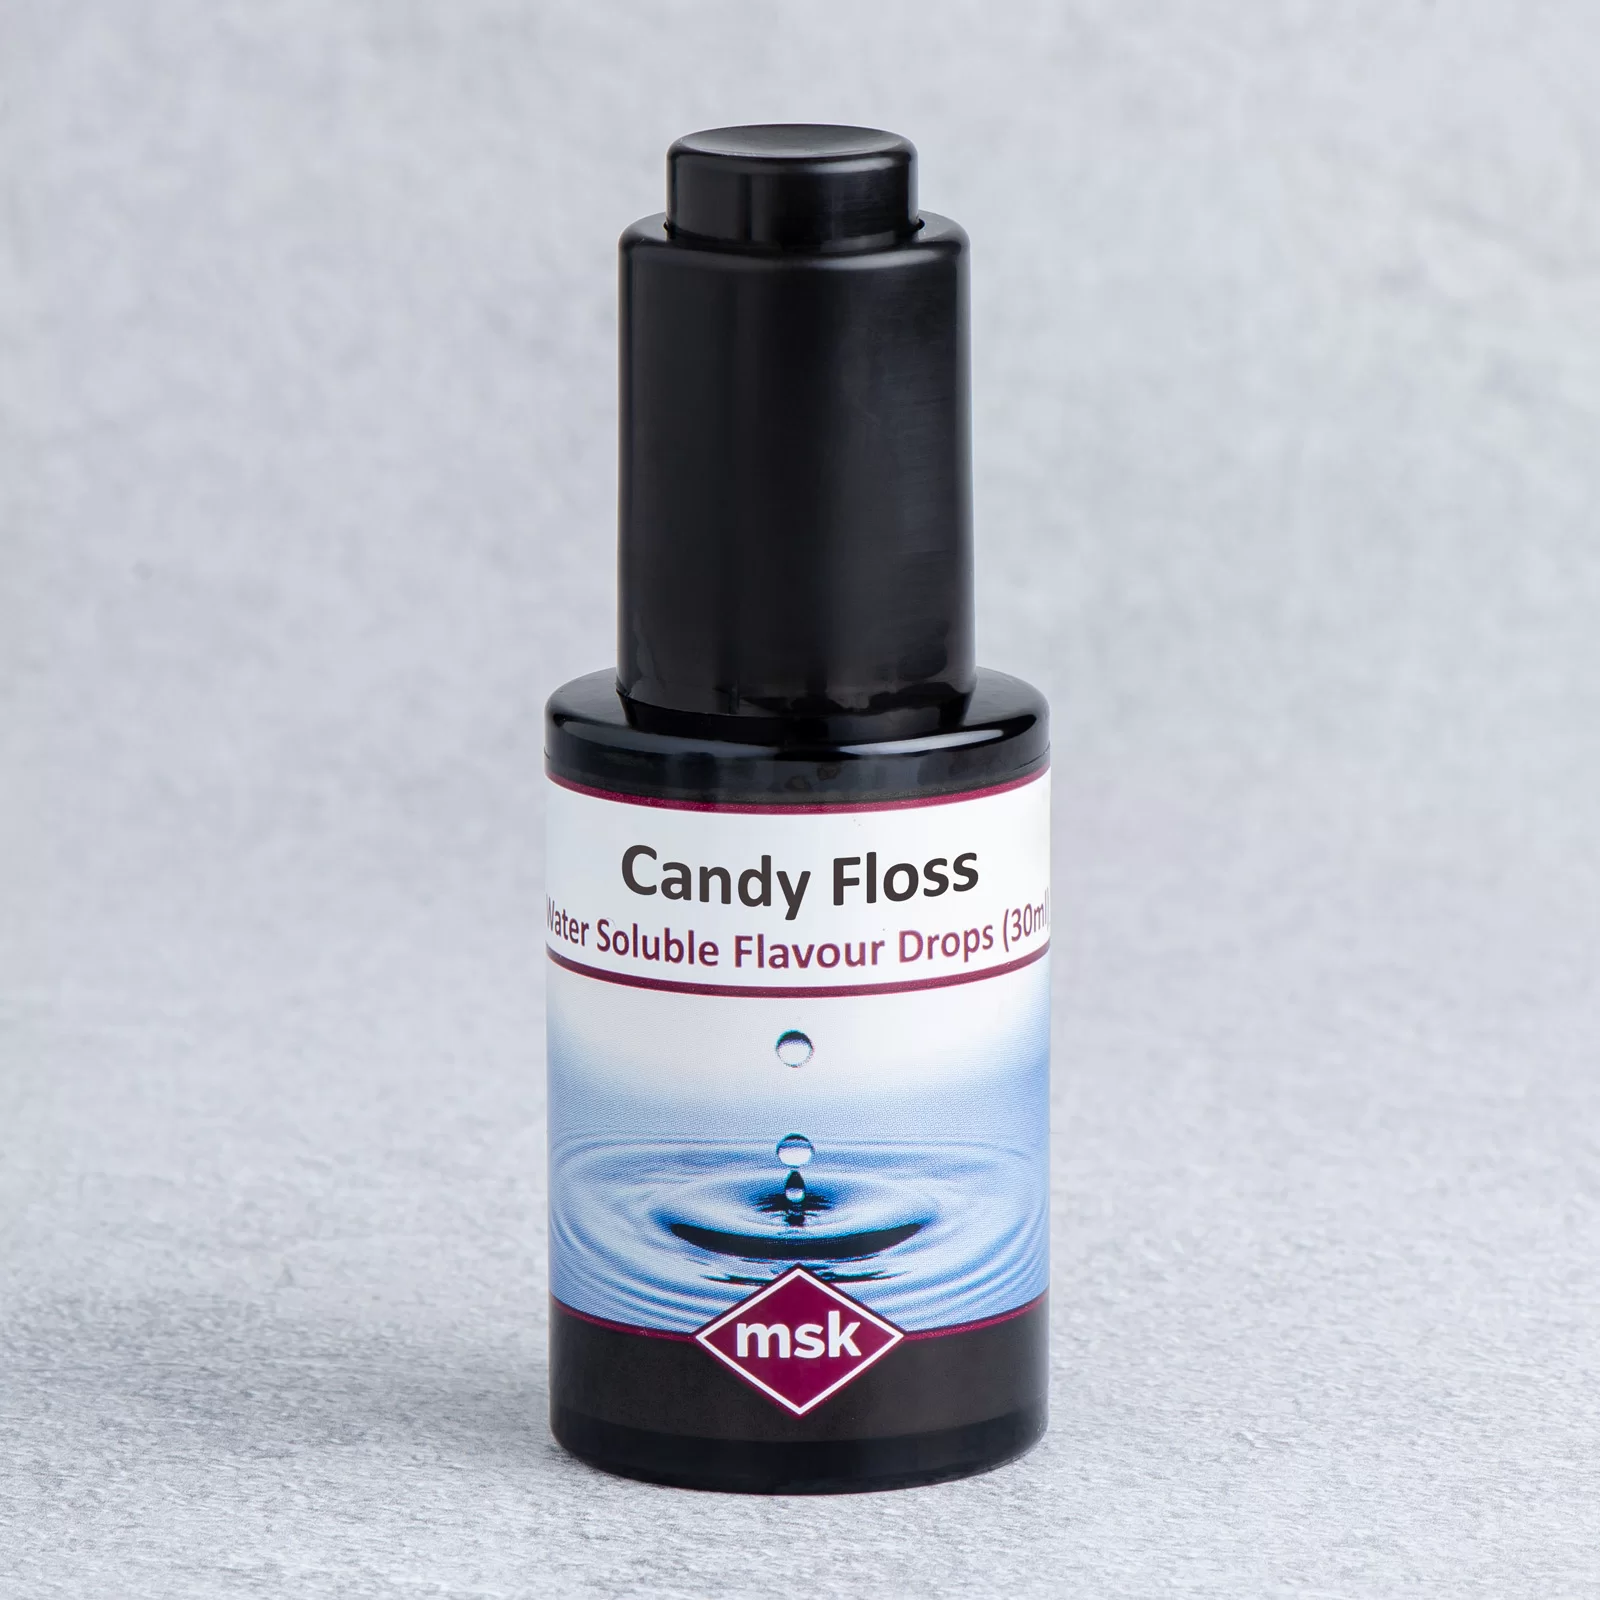 guld Rustik Brig Candy Floss Flavour Drops (water soluble), 30ml